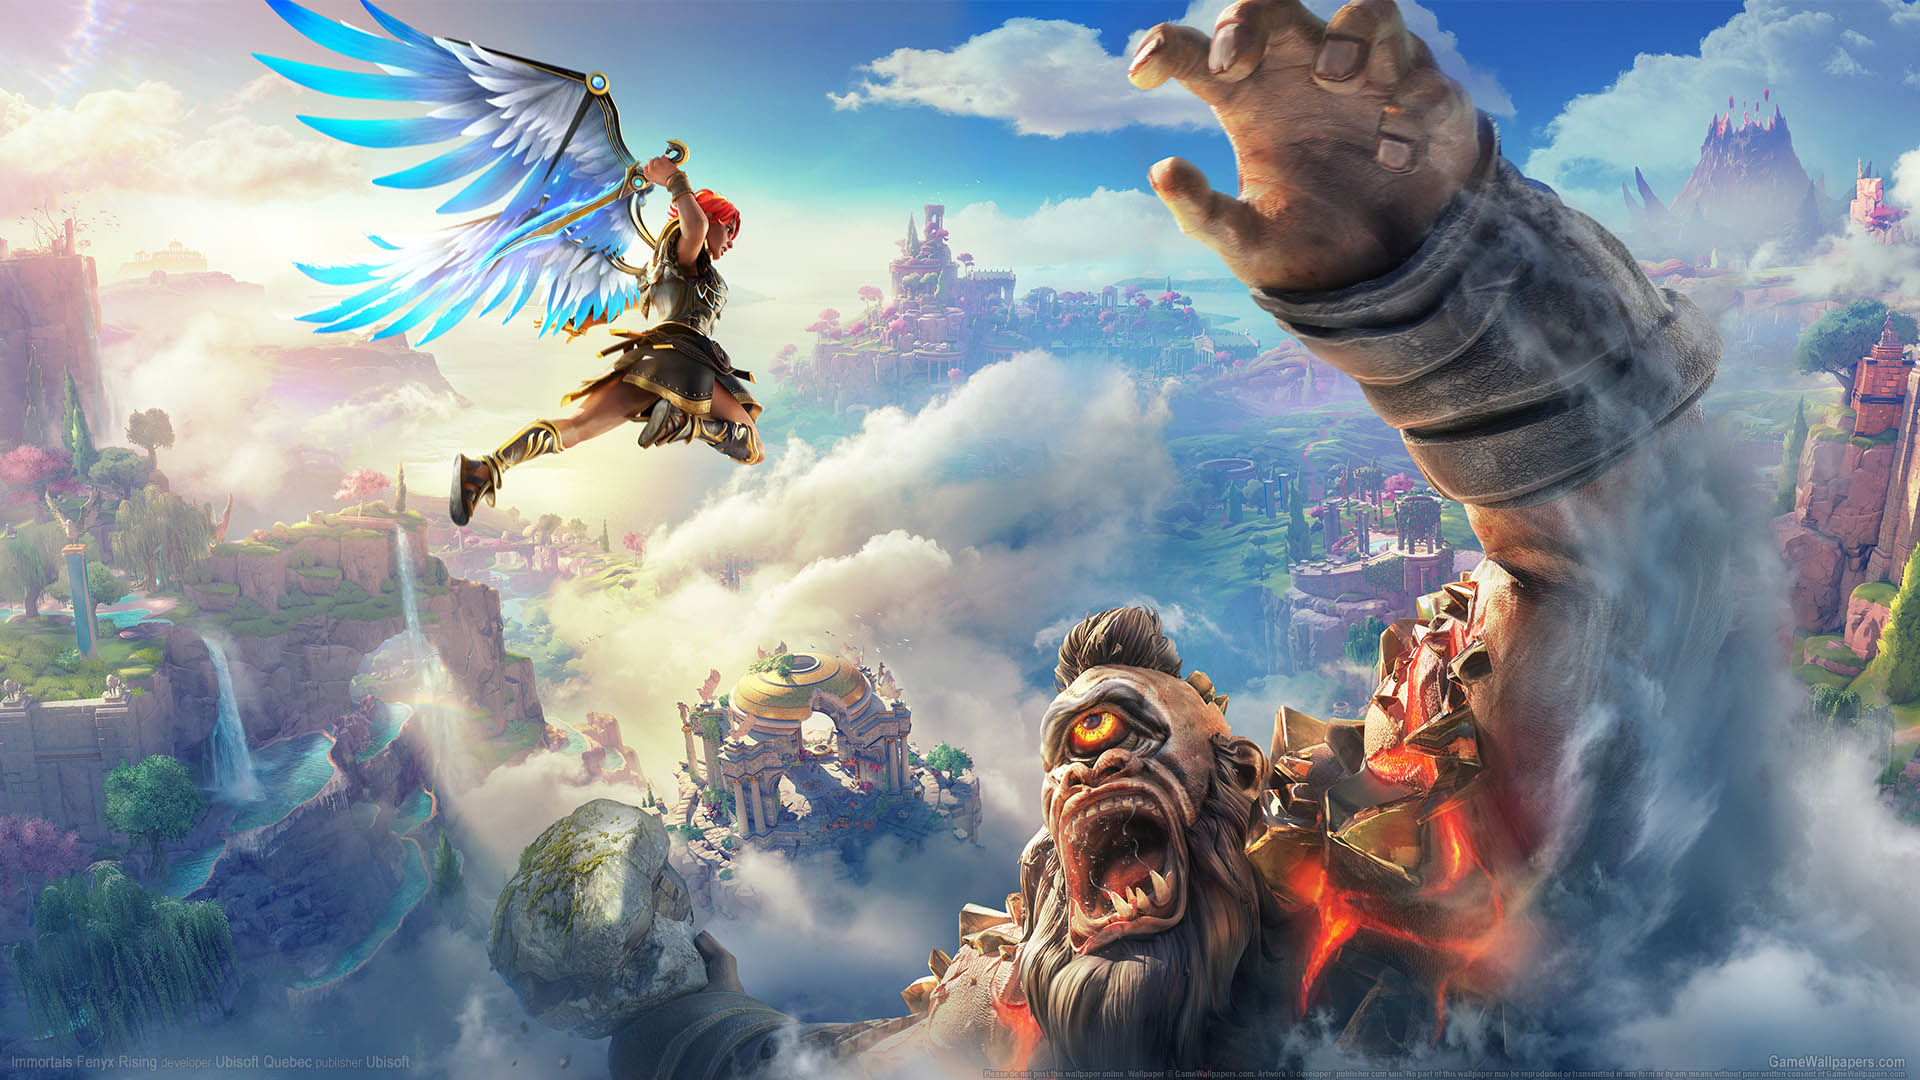 Image for Grab Immortals Fenyx Rising and more for cheap in the Amazon Gaming Week promotion